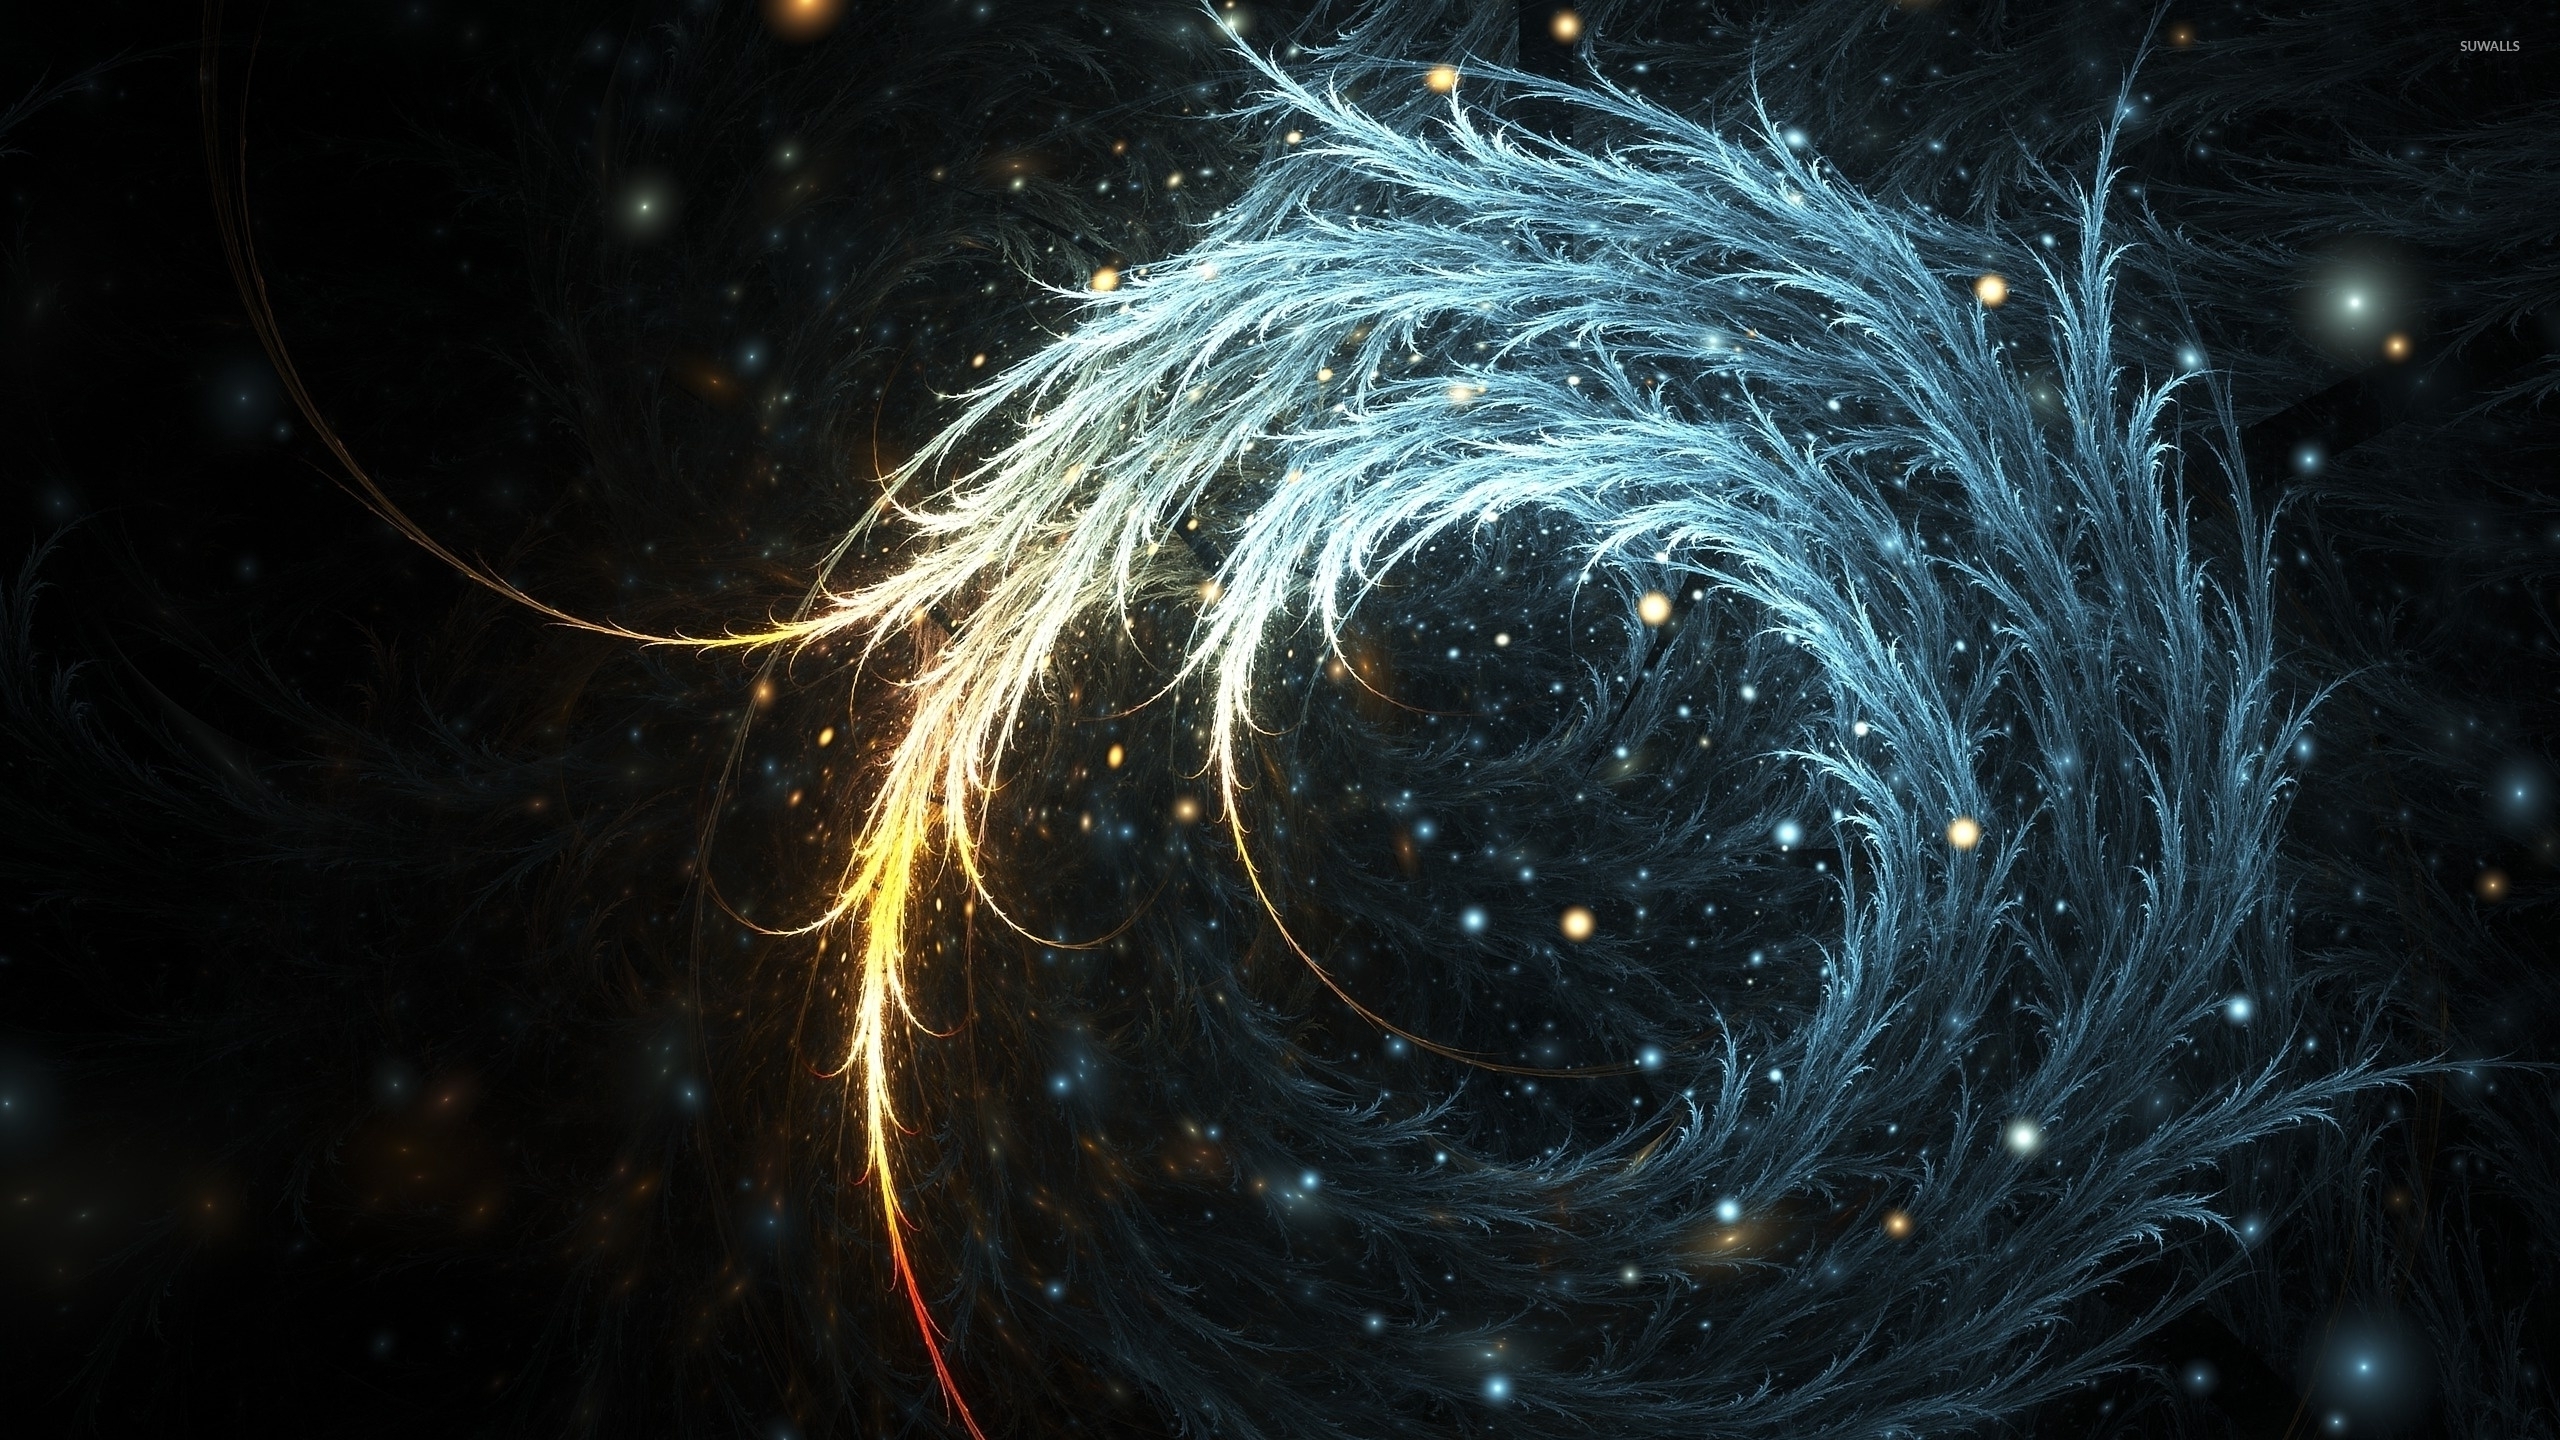 Bright swirl between bright sparks wallpaper Abstract wallpapers